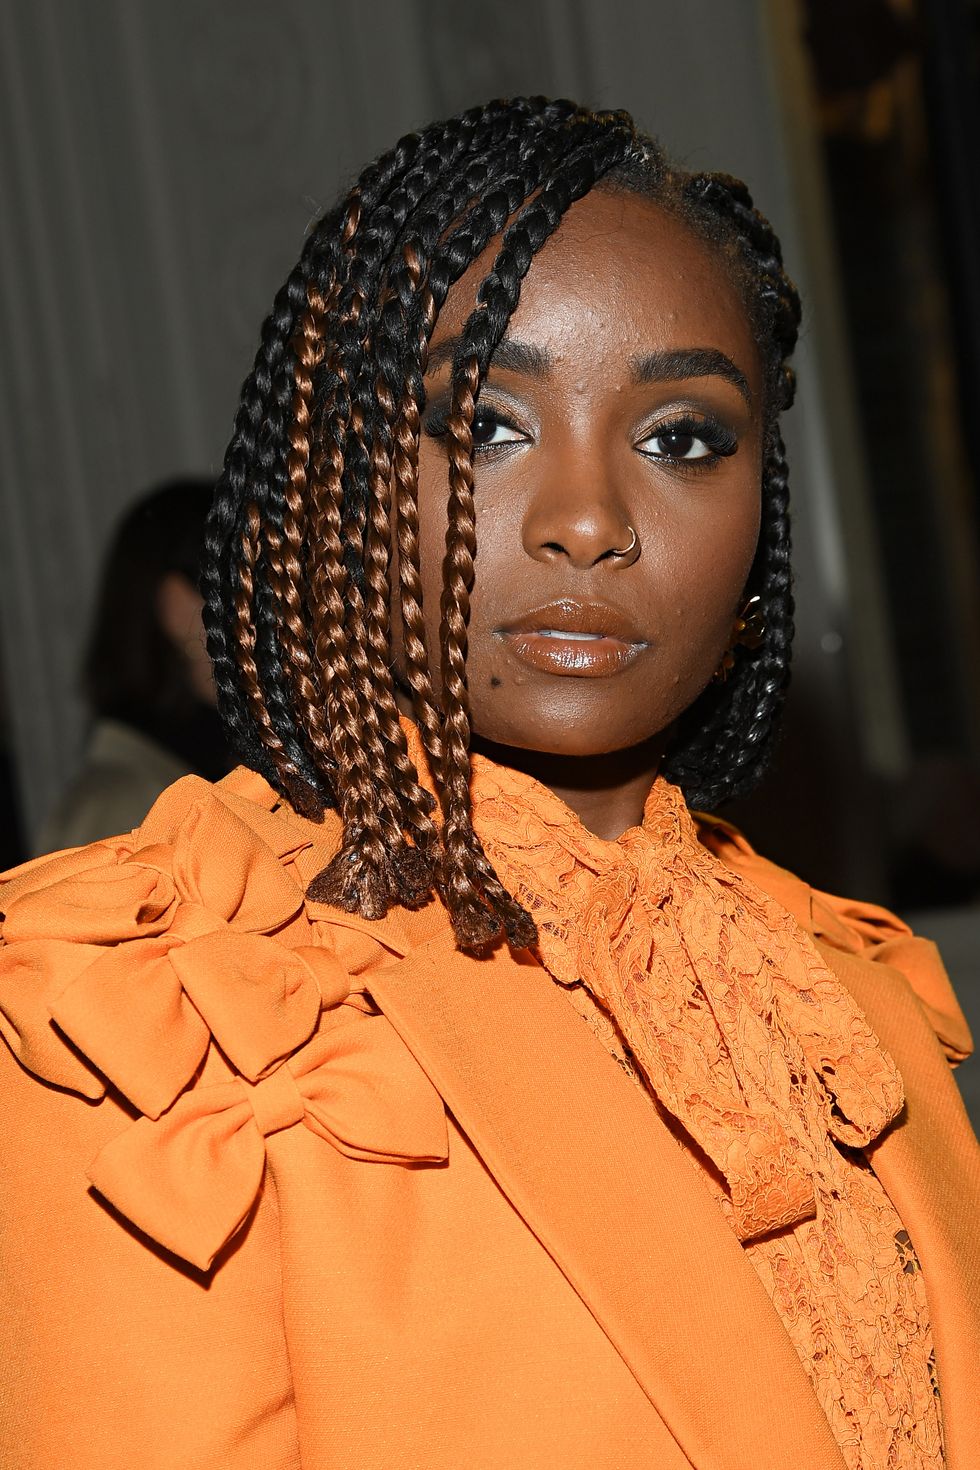 kiki-layne-attends-the-valentino-haute-couture-spring-news-photo-1585166731.jpg?crop=1xw:1xh;center,top&resize=980:*